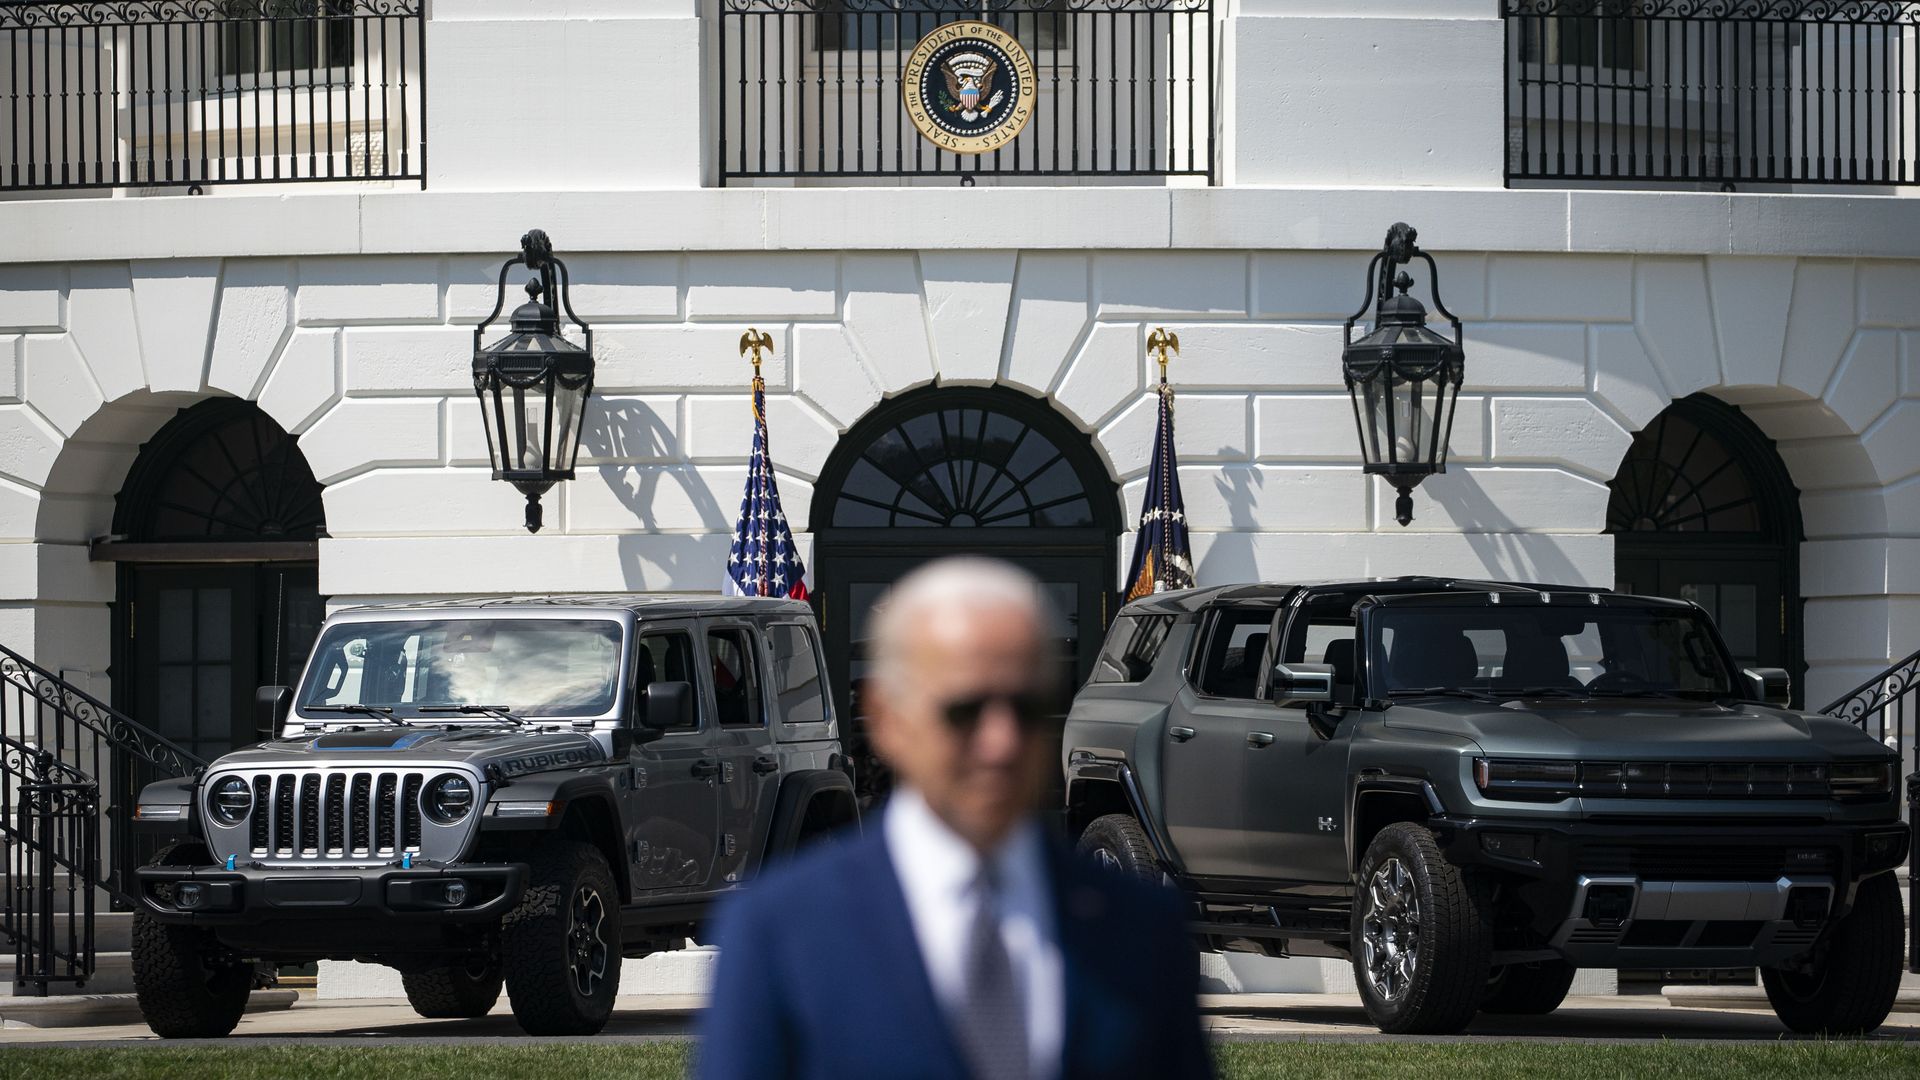 President Biden is seen in front of two cars during a clean-energy event on the White House South Lawn.